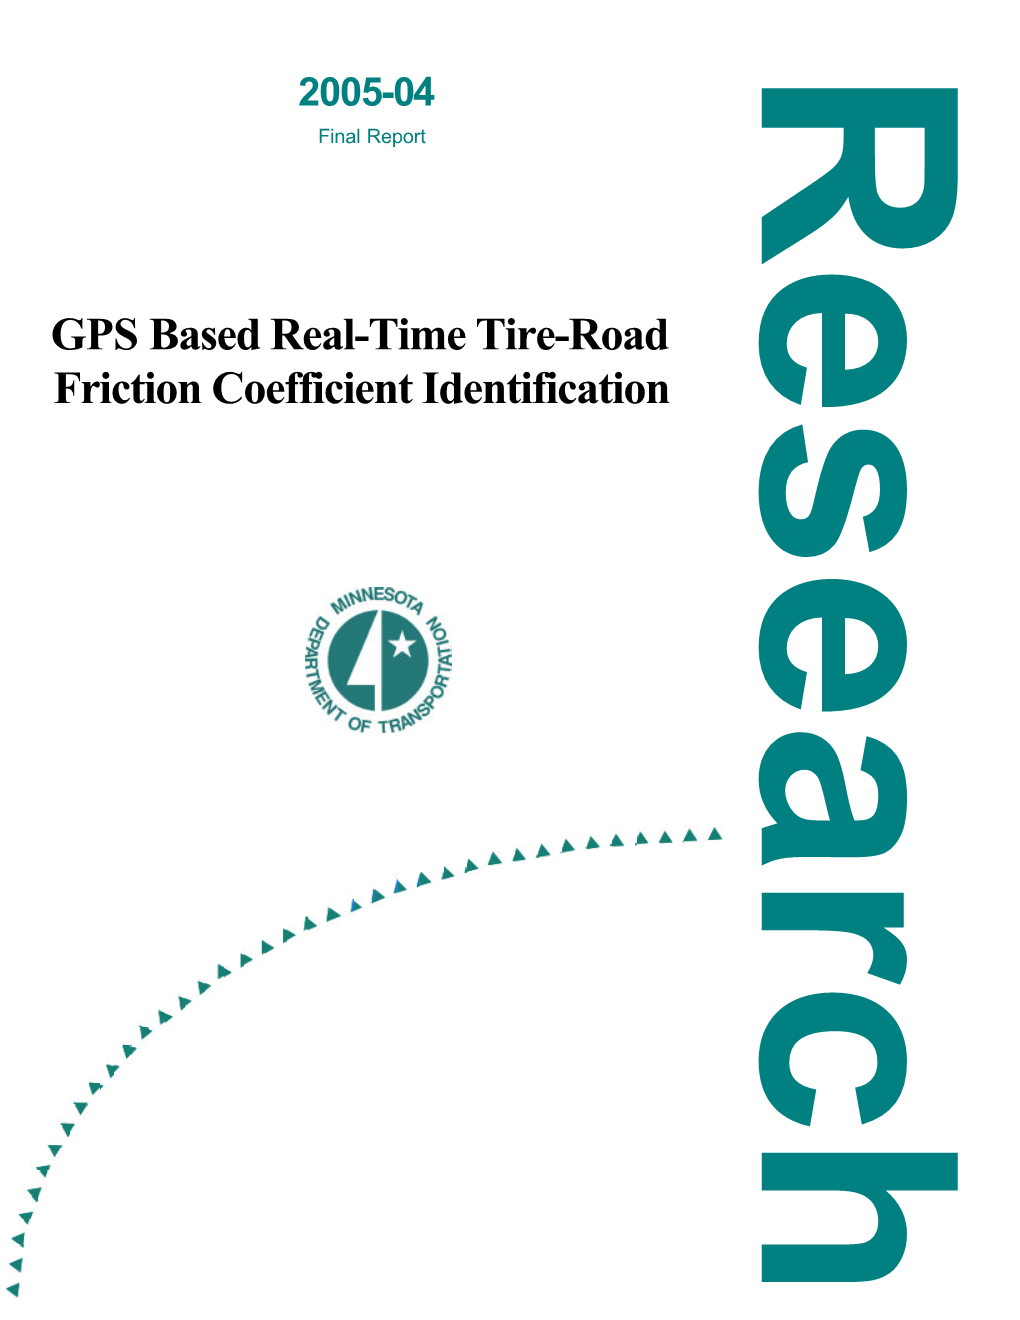 Gps Based Real-Time Tire-Road Friction Coefficient Identification